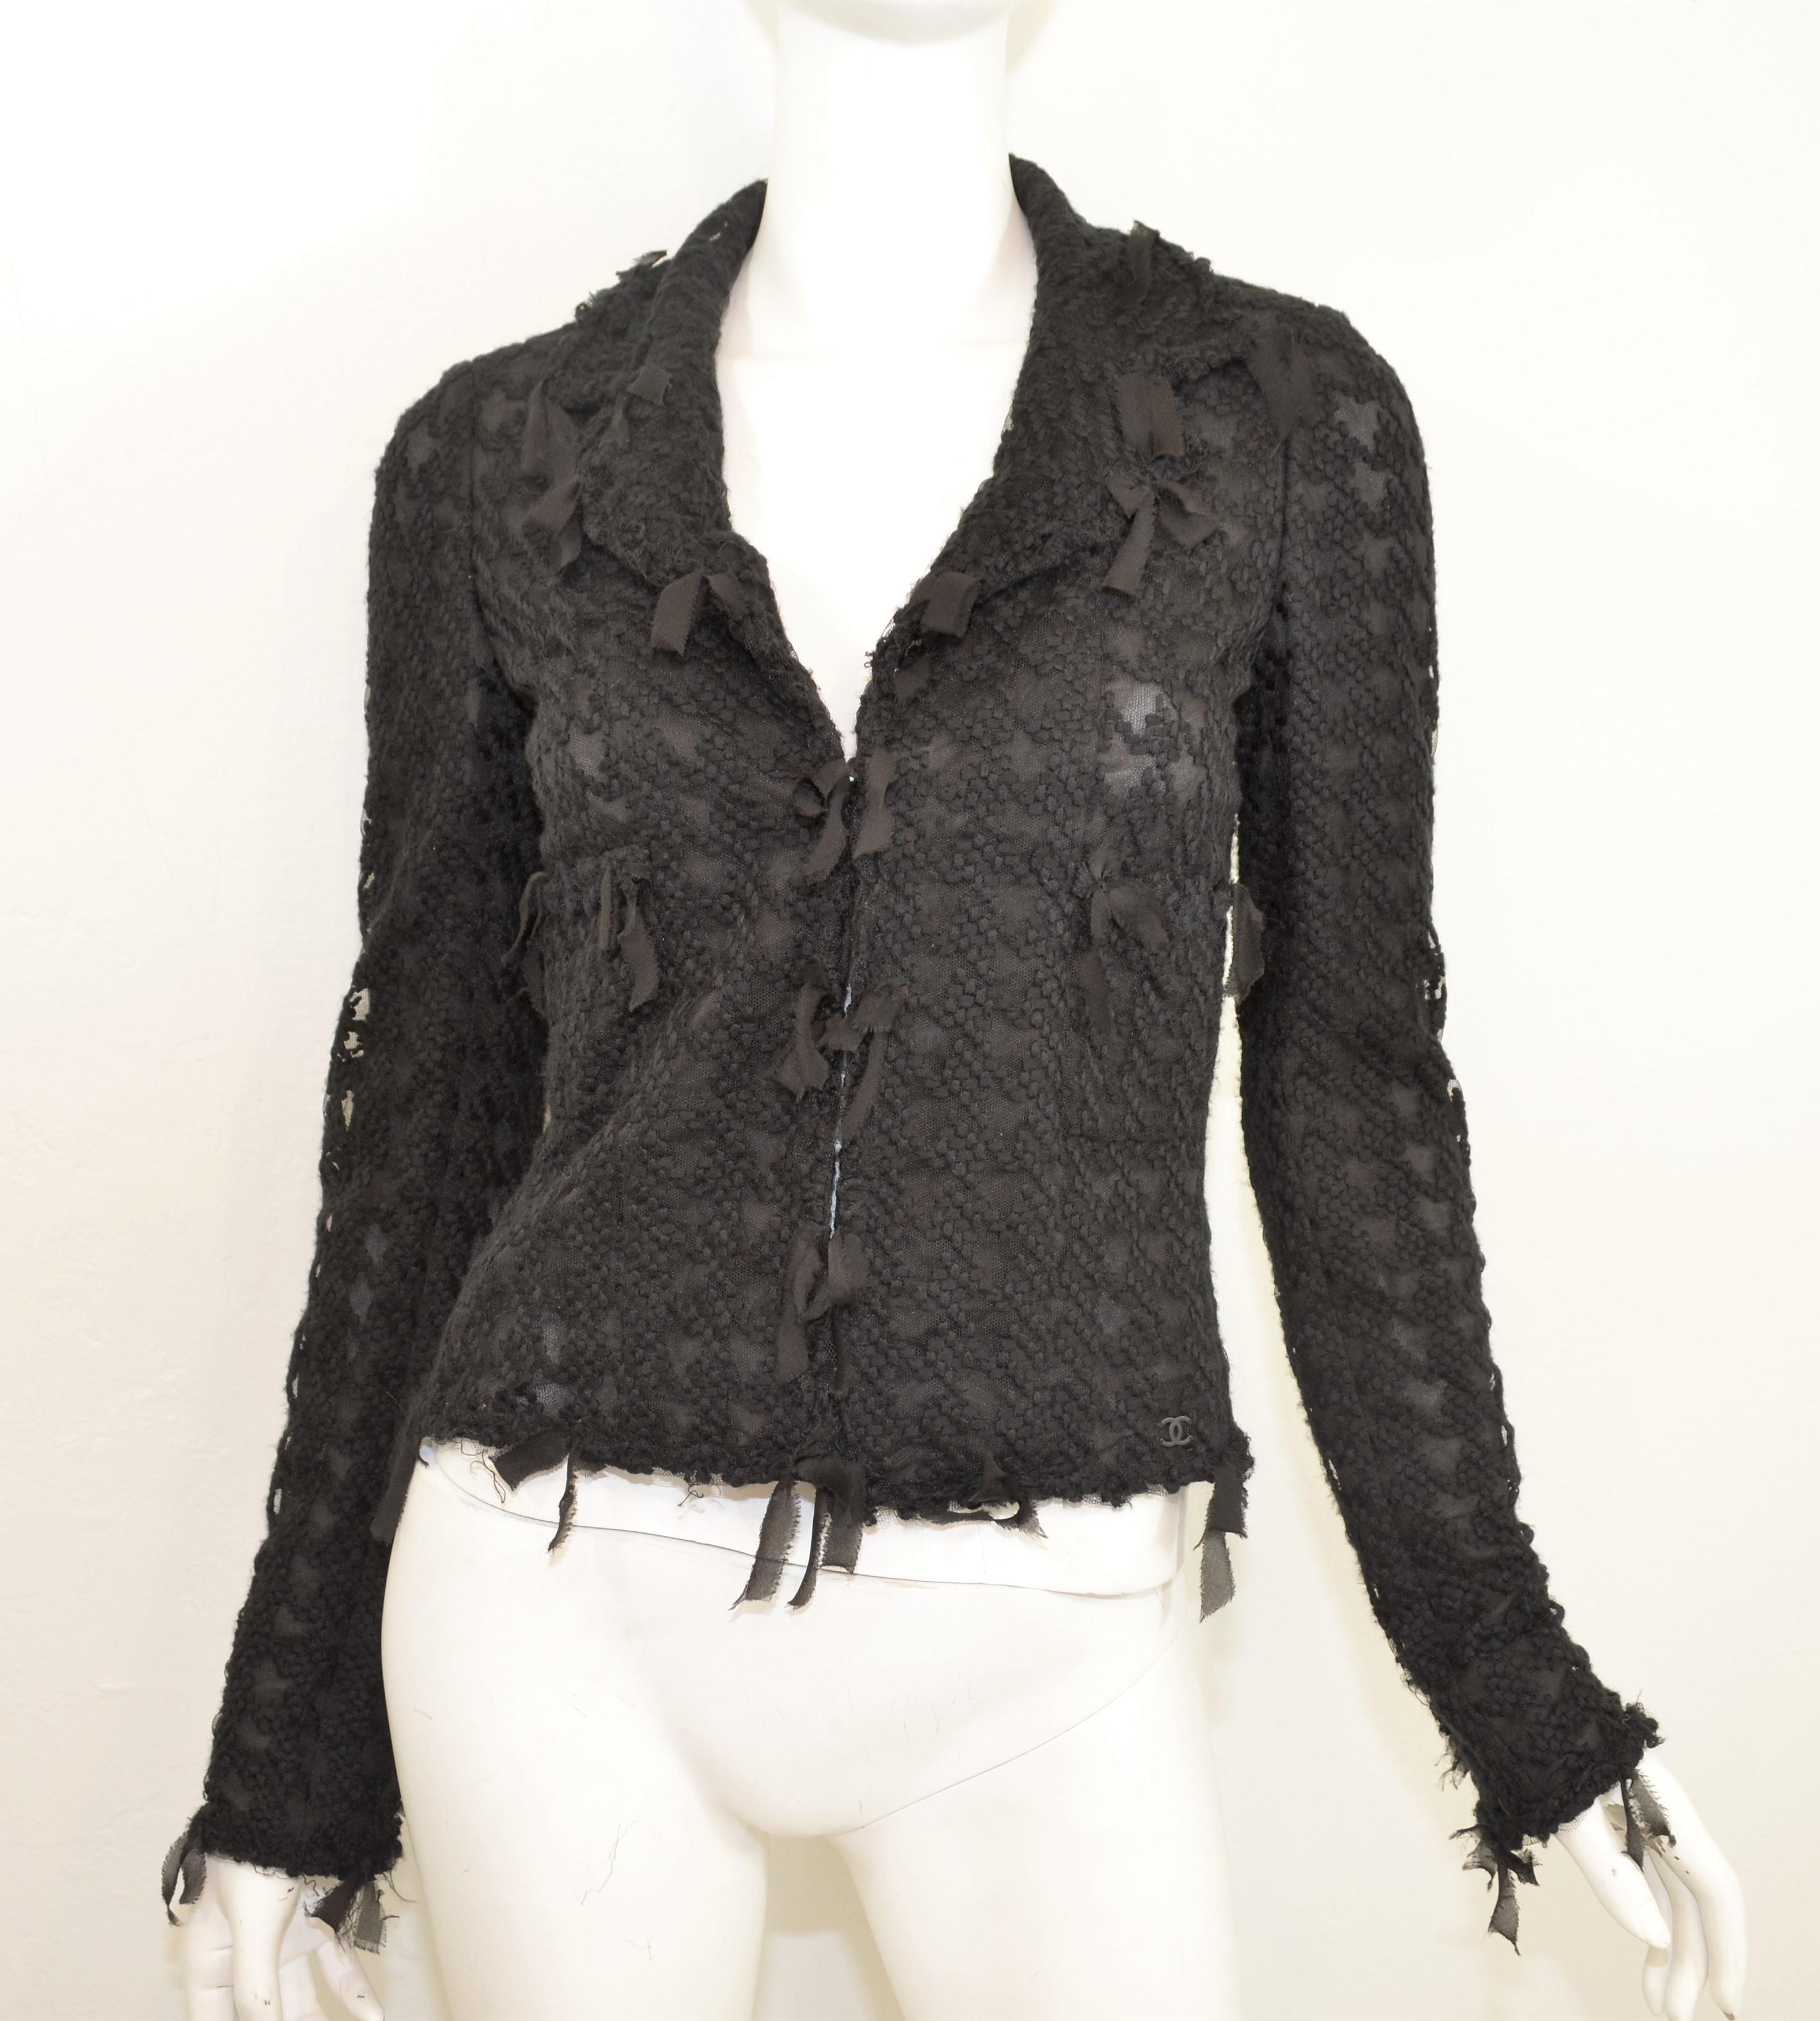 From the 2005 Cruise collection, this Chanel jacket is featured in black with a houndstooth pattern throughout the mesh fabric and a deconstructed silk fringe trimming. Jacket has an open front, camellia flower buttons at the cuffs, a full lining,